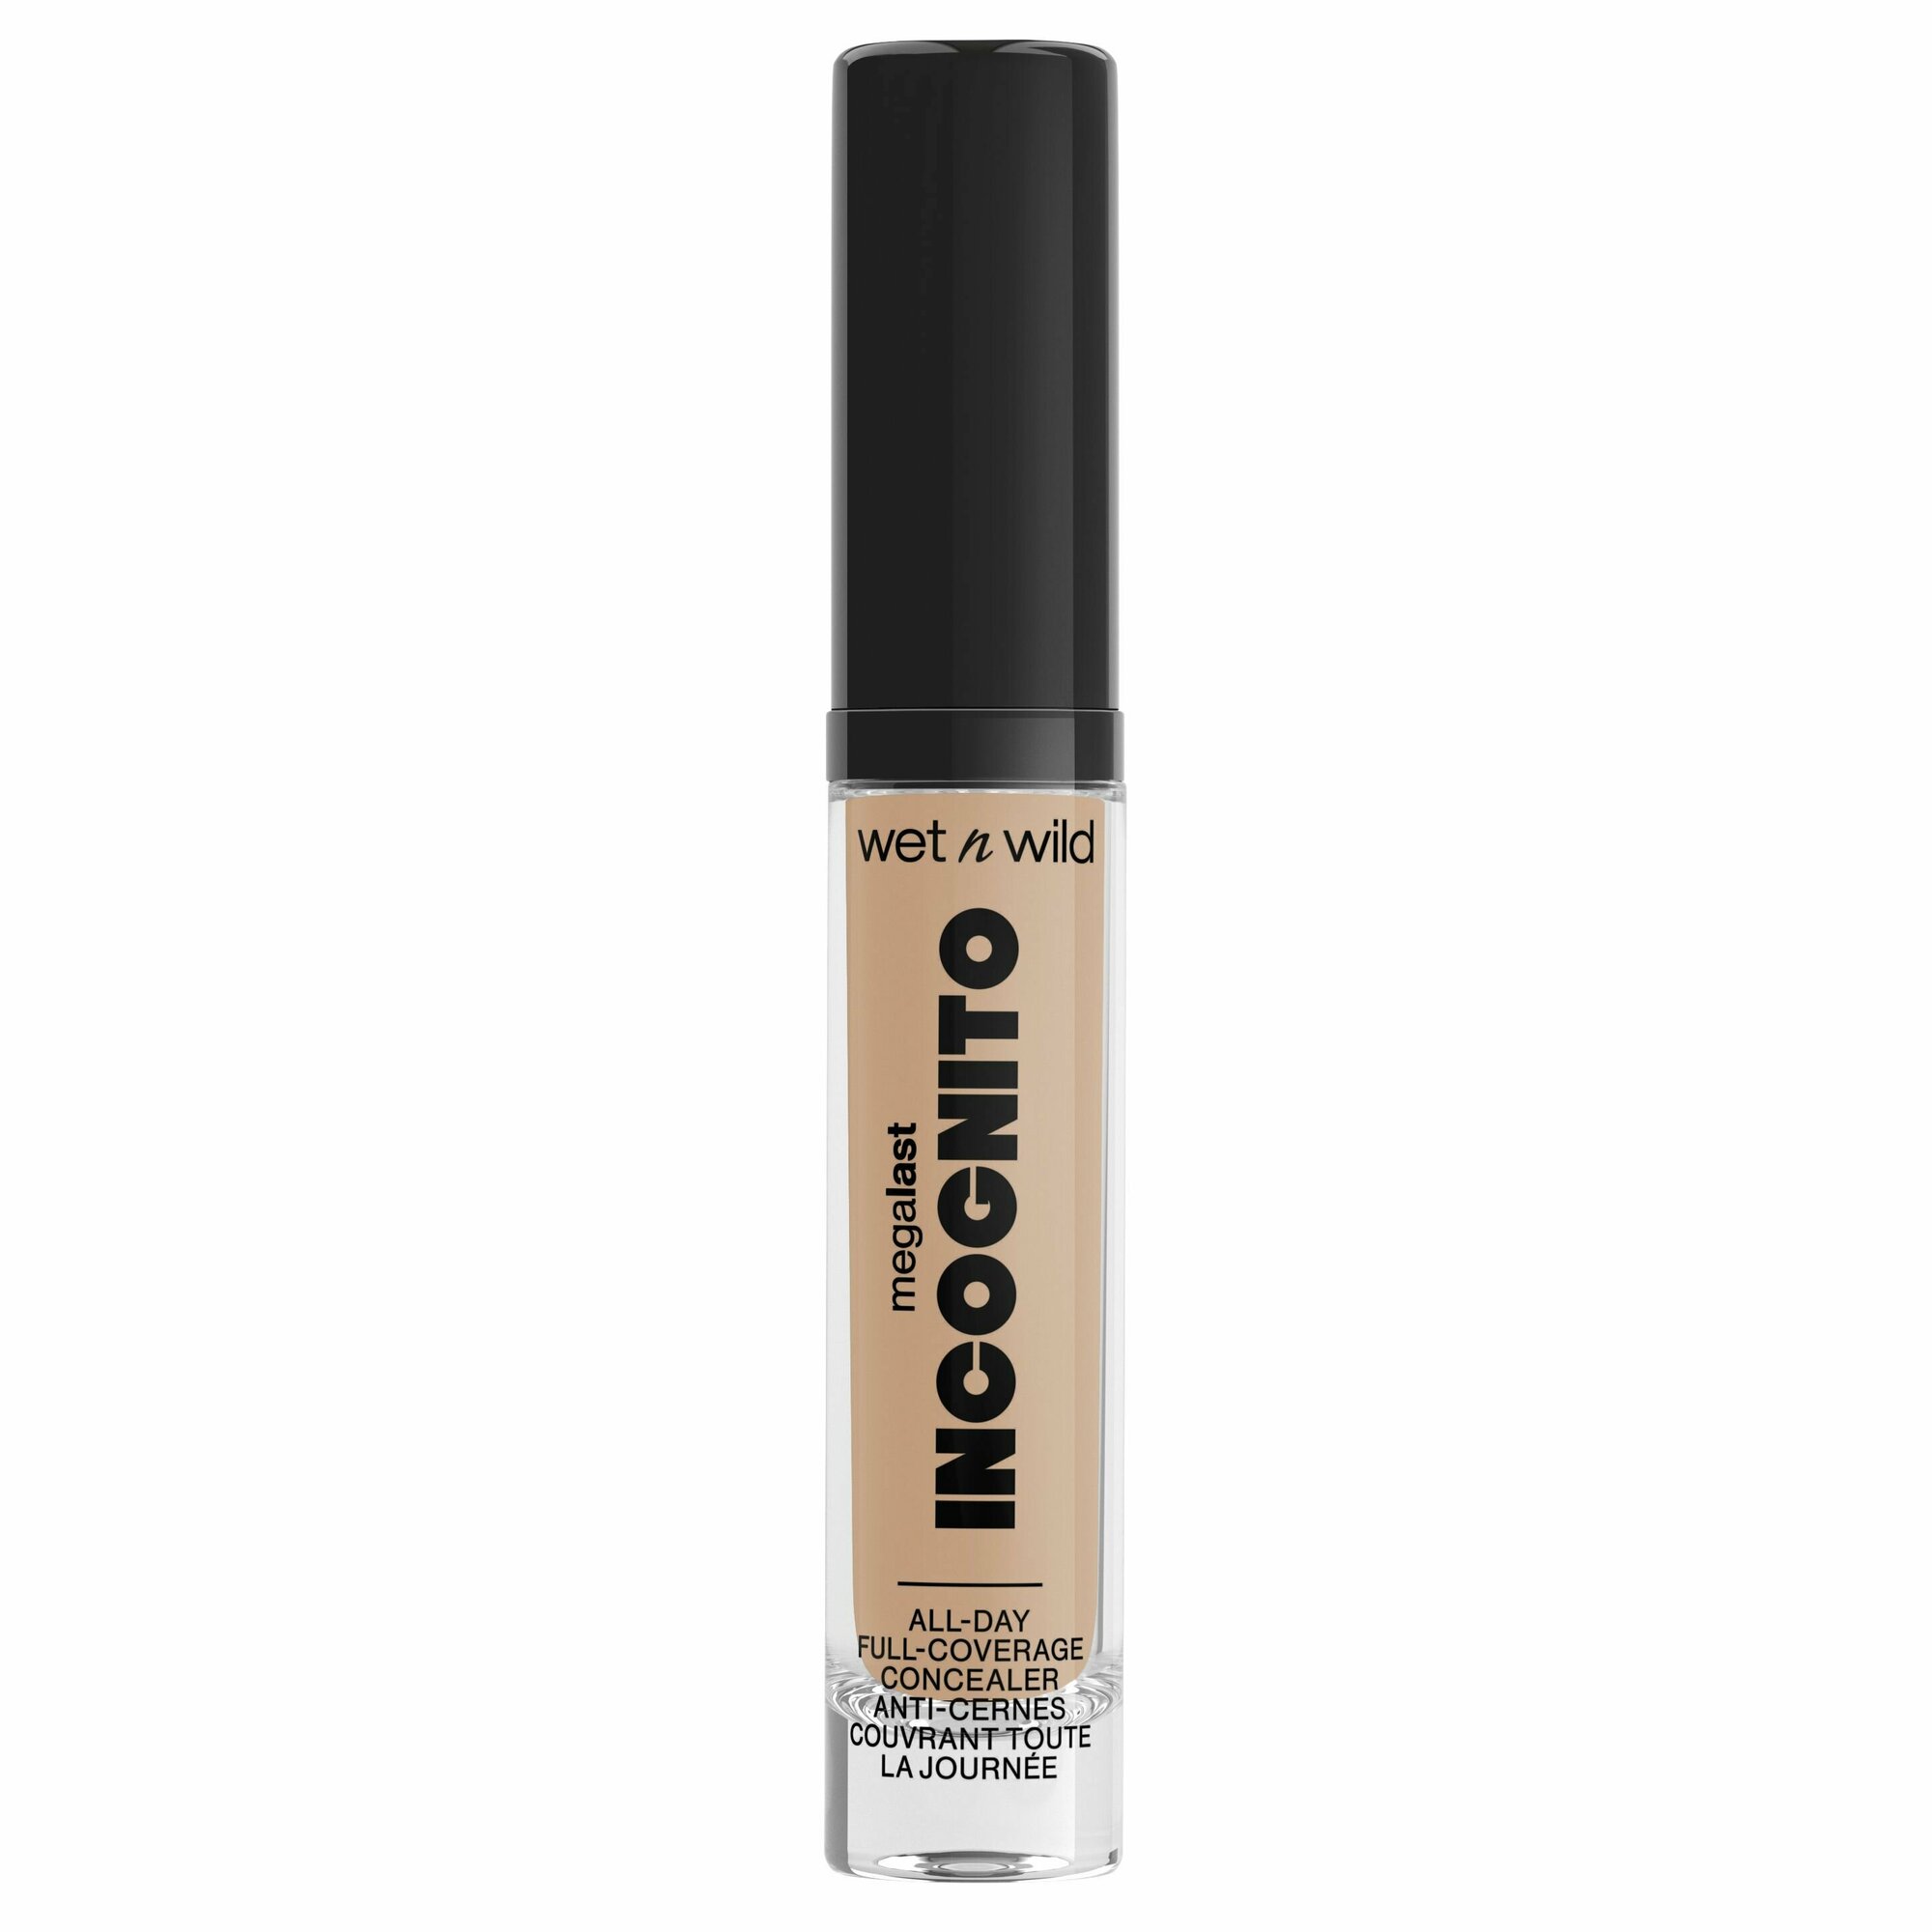 Wet n Wild Консилер для лица MegaLast Incognito All-Day Full Coverage Concealer Тон 1111904e medium neutral